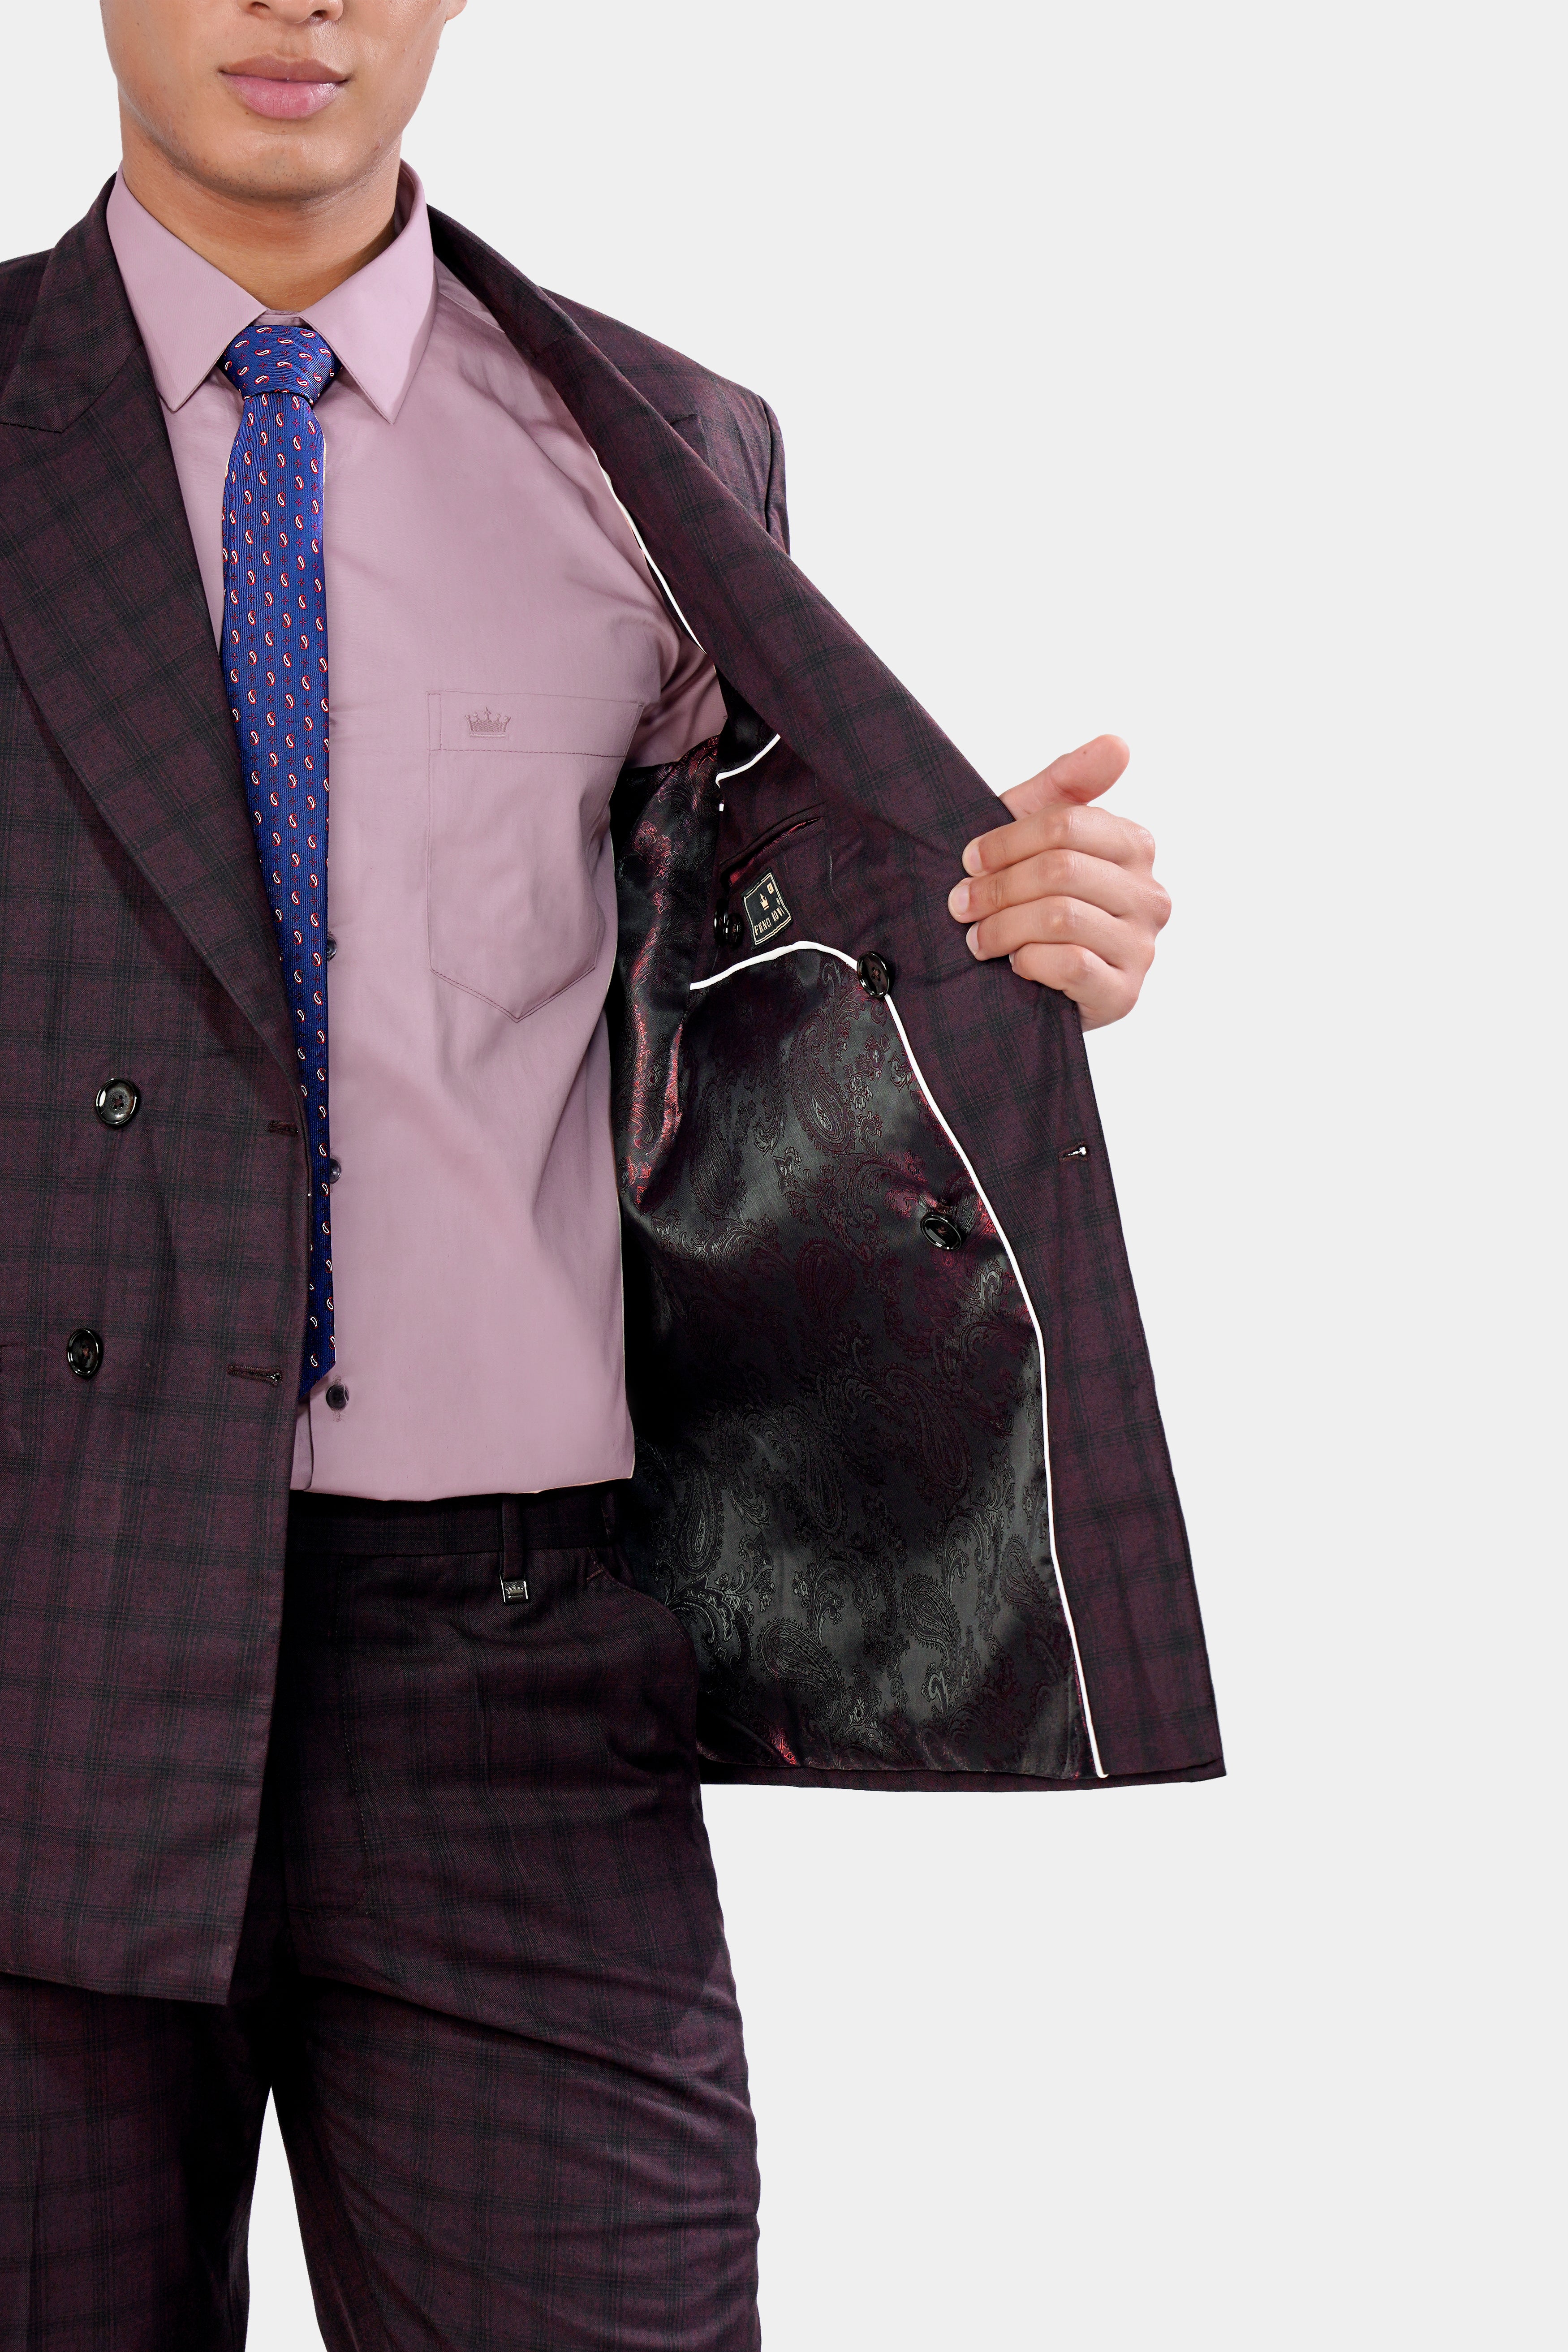 Cinder Purple Checkered Double Breasted Wool Rich Blazer BL2916-DB-36, BL2916-DB-38, BL2916-DB-40, BL2916-DB-42, BL2916-DB-44, BL2916-DB-46, BL2916-DB-48, BL2916-DB-50, BL2916-DB-52, BL2916-DB-54, BL2916-DB-56, BL2916-DB-58, BL2916-DB-60